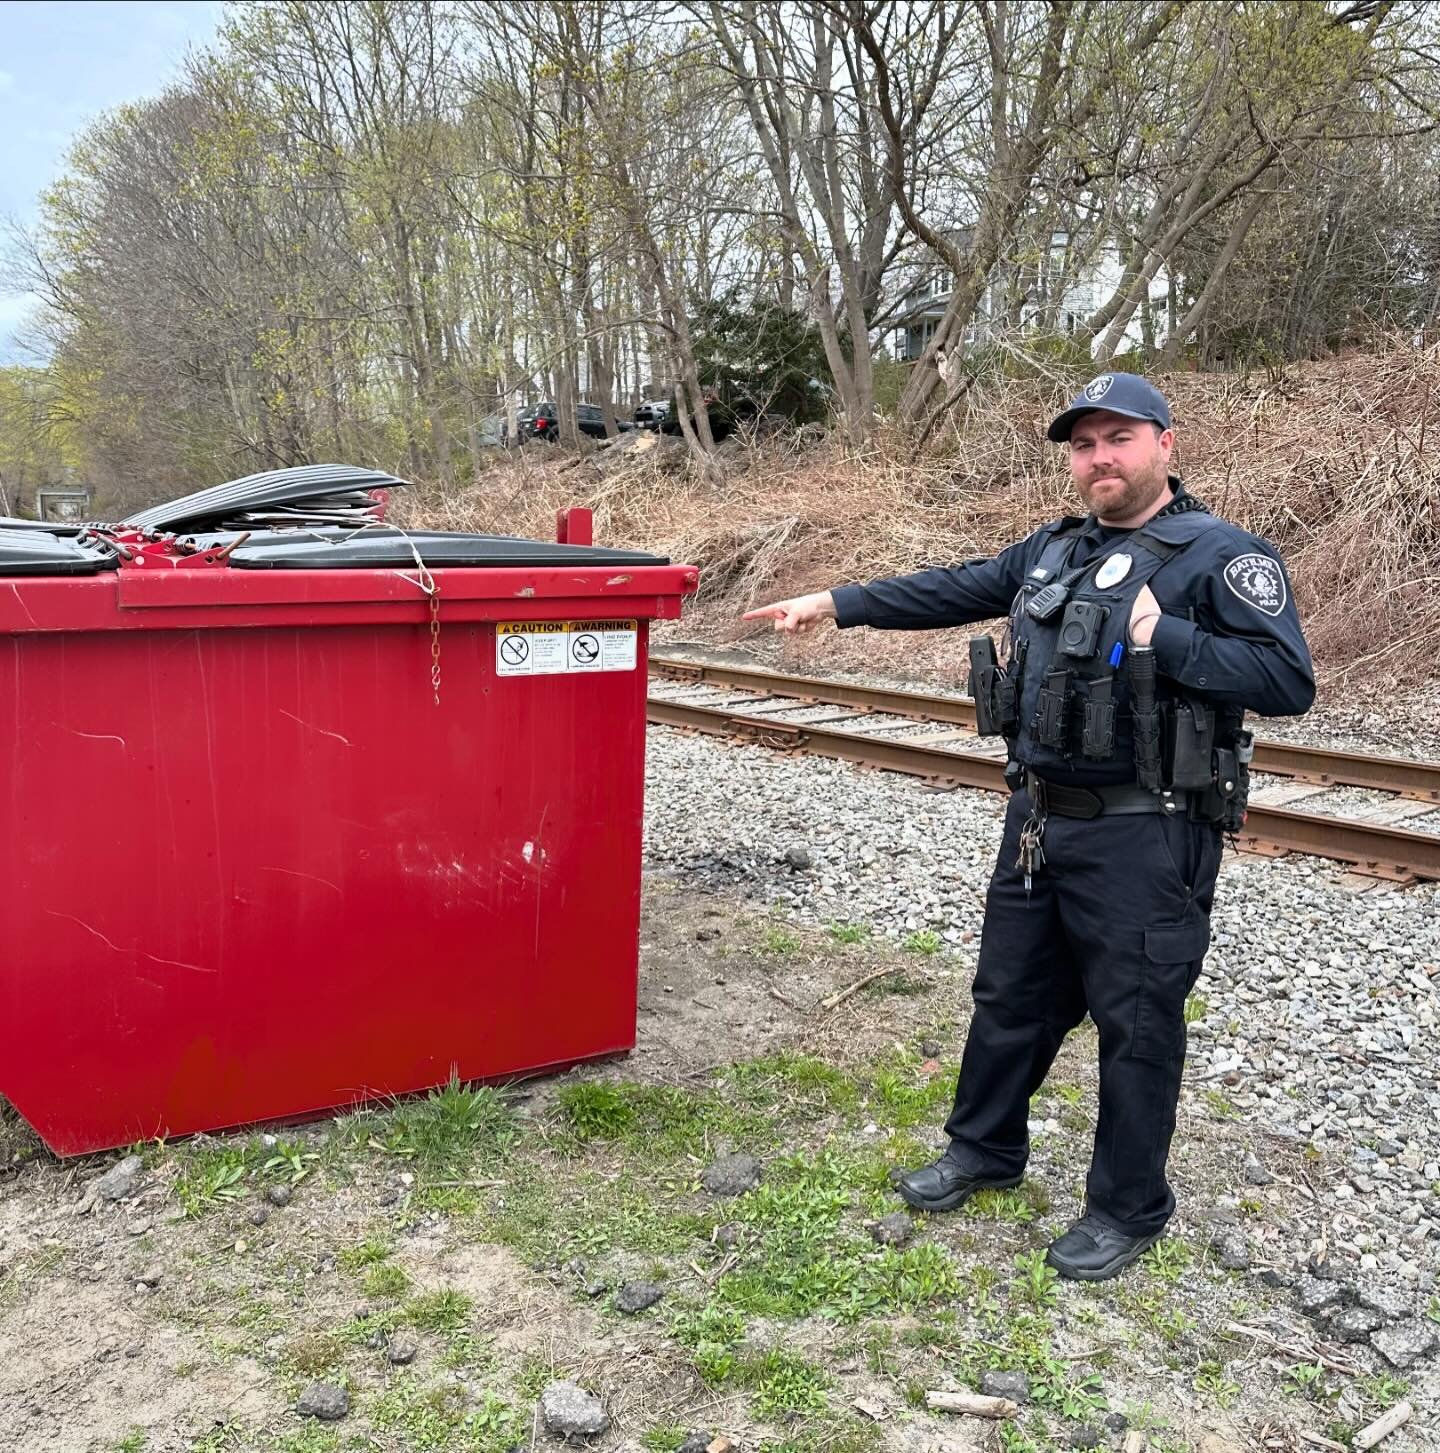 Why is Officer Nick so mad? Because people keep busting our dumpster locks open and illegally dumping here! It&rsquo;s an added weekly cost to our small business that we can&rsquo;t keep eating. So today, we set up cameras and a plan with the Bath PD